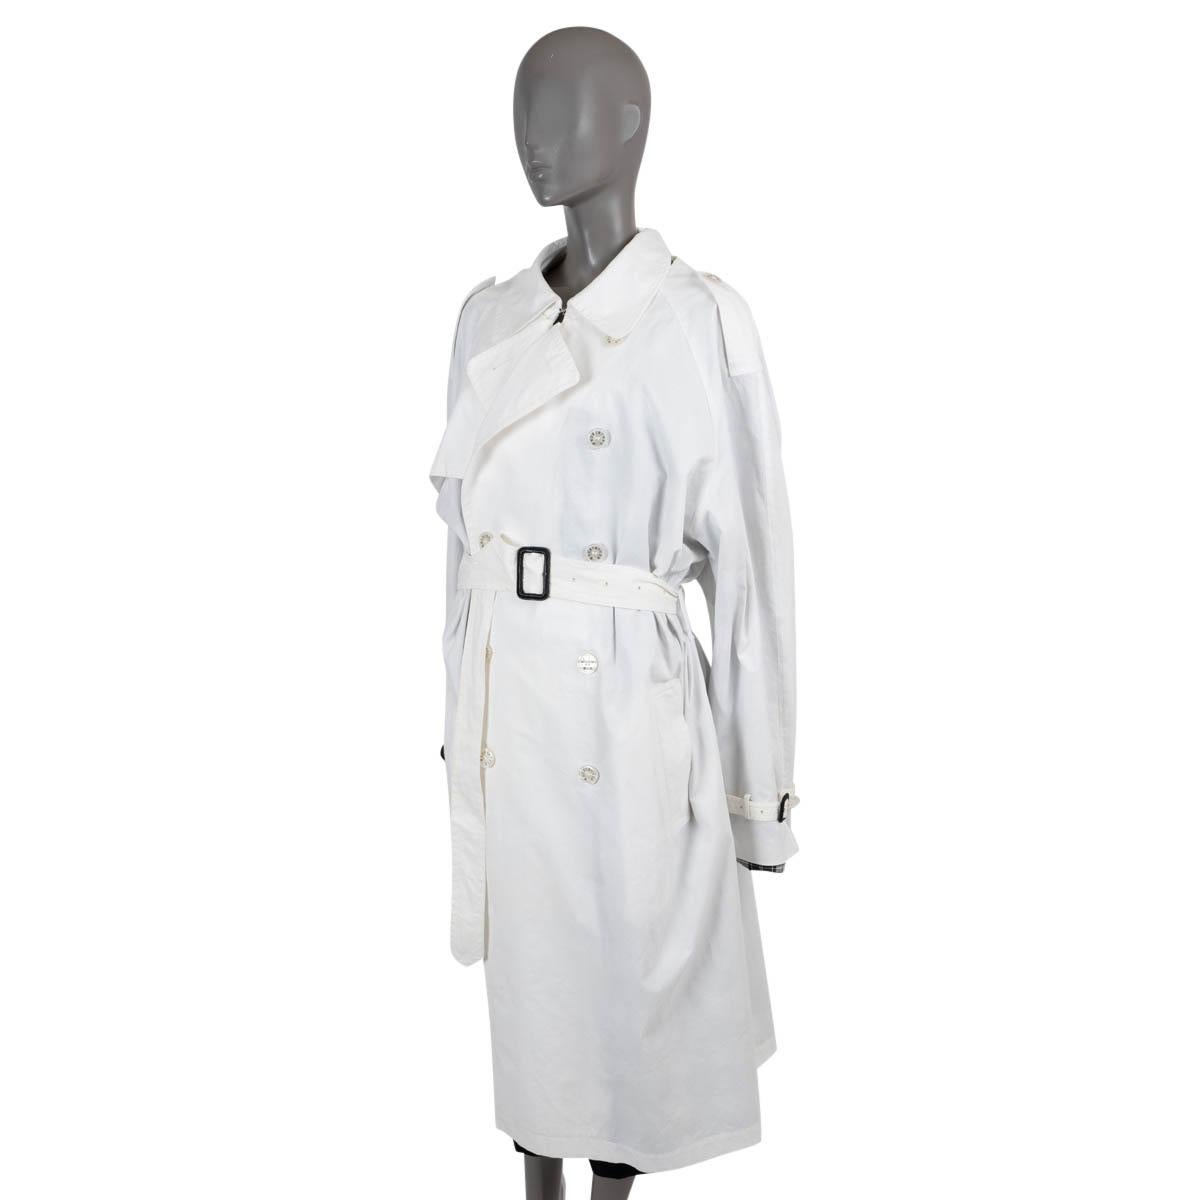 100% authentic Vetments x Mackintosh trench coat in cream cotton (100%). Unzips in the back to reveal plaid lining, features an oversized fit with classic trench coat details. Closes with buttons and self-tie belt in the front and is lined in plaid